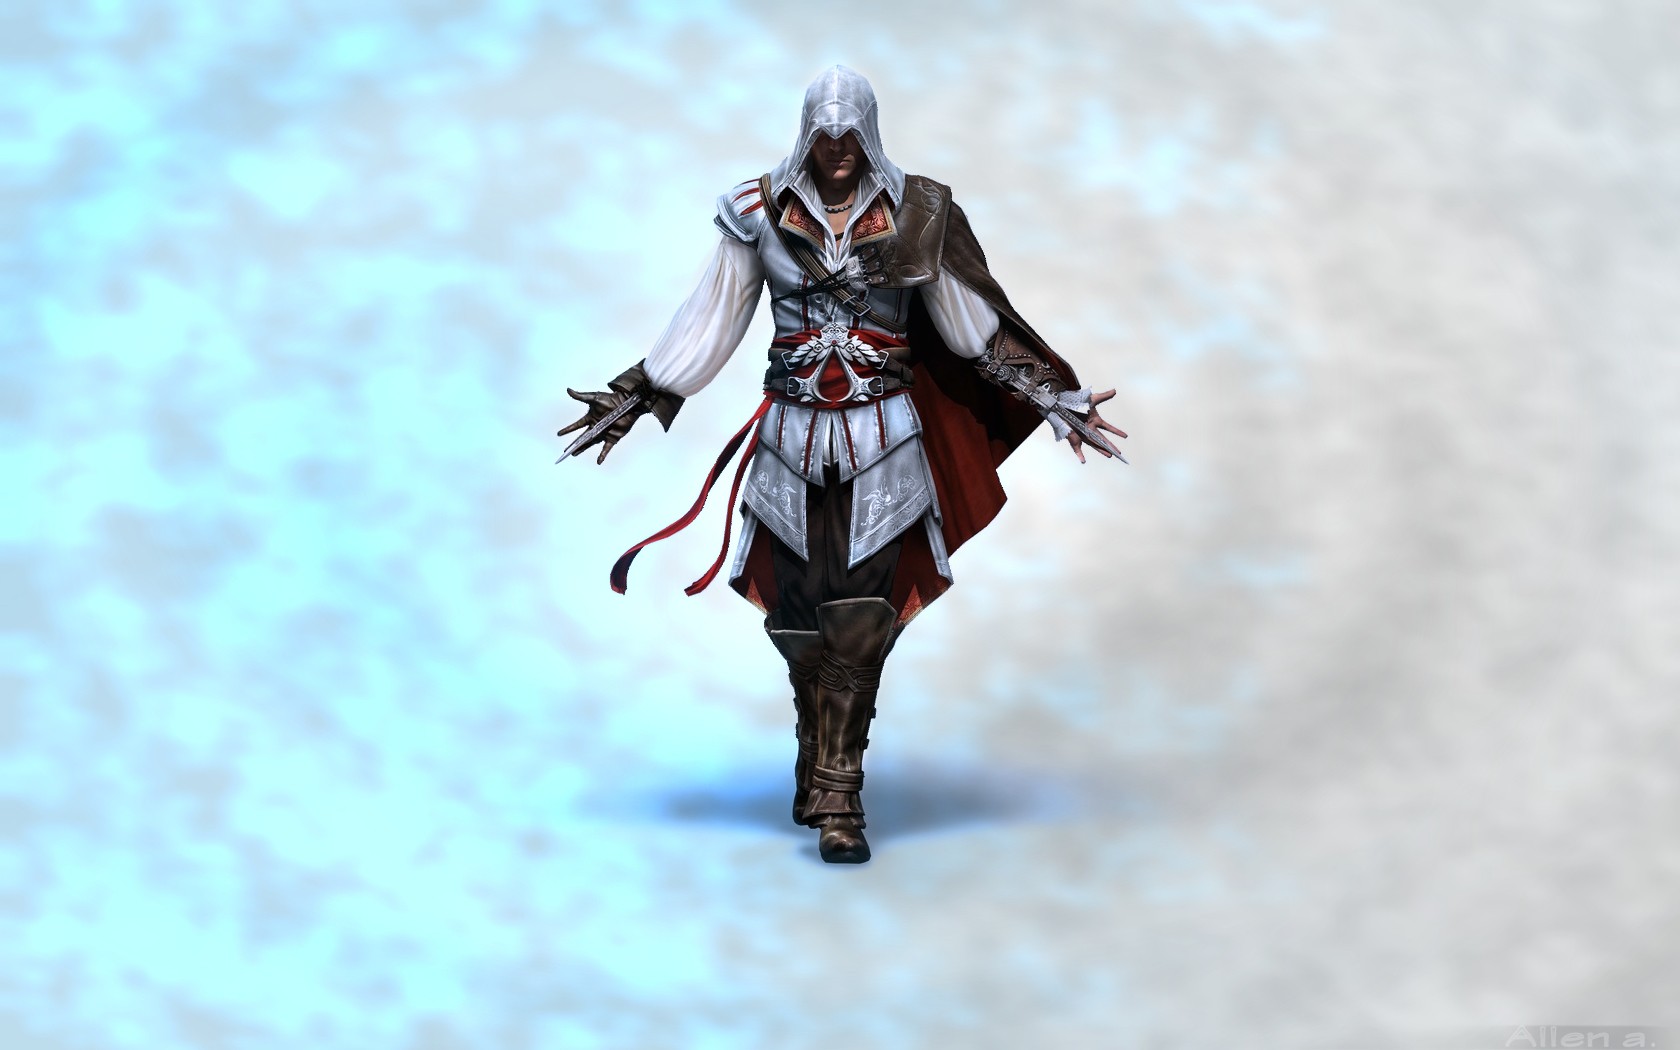 General 1680x1050 Assassin's Creed Assassin's Creed II video games PC gaming video game men hoods Ubisoft video game art cyan